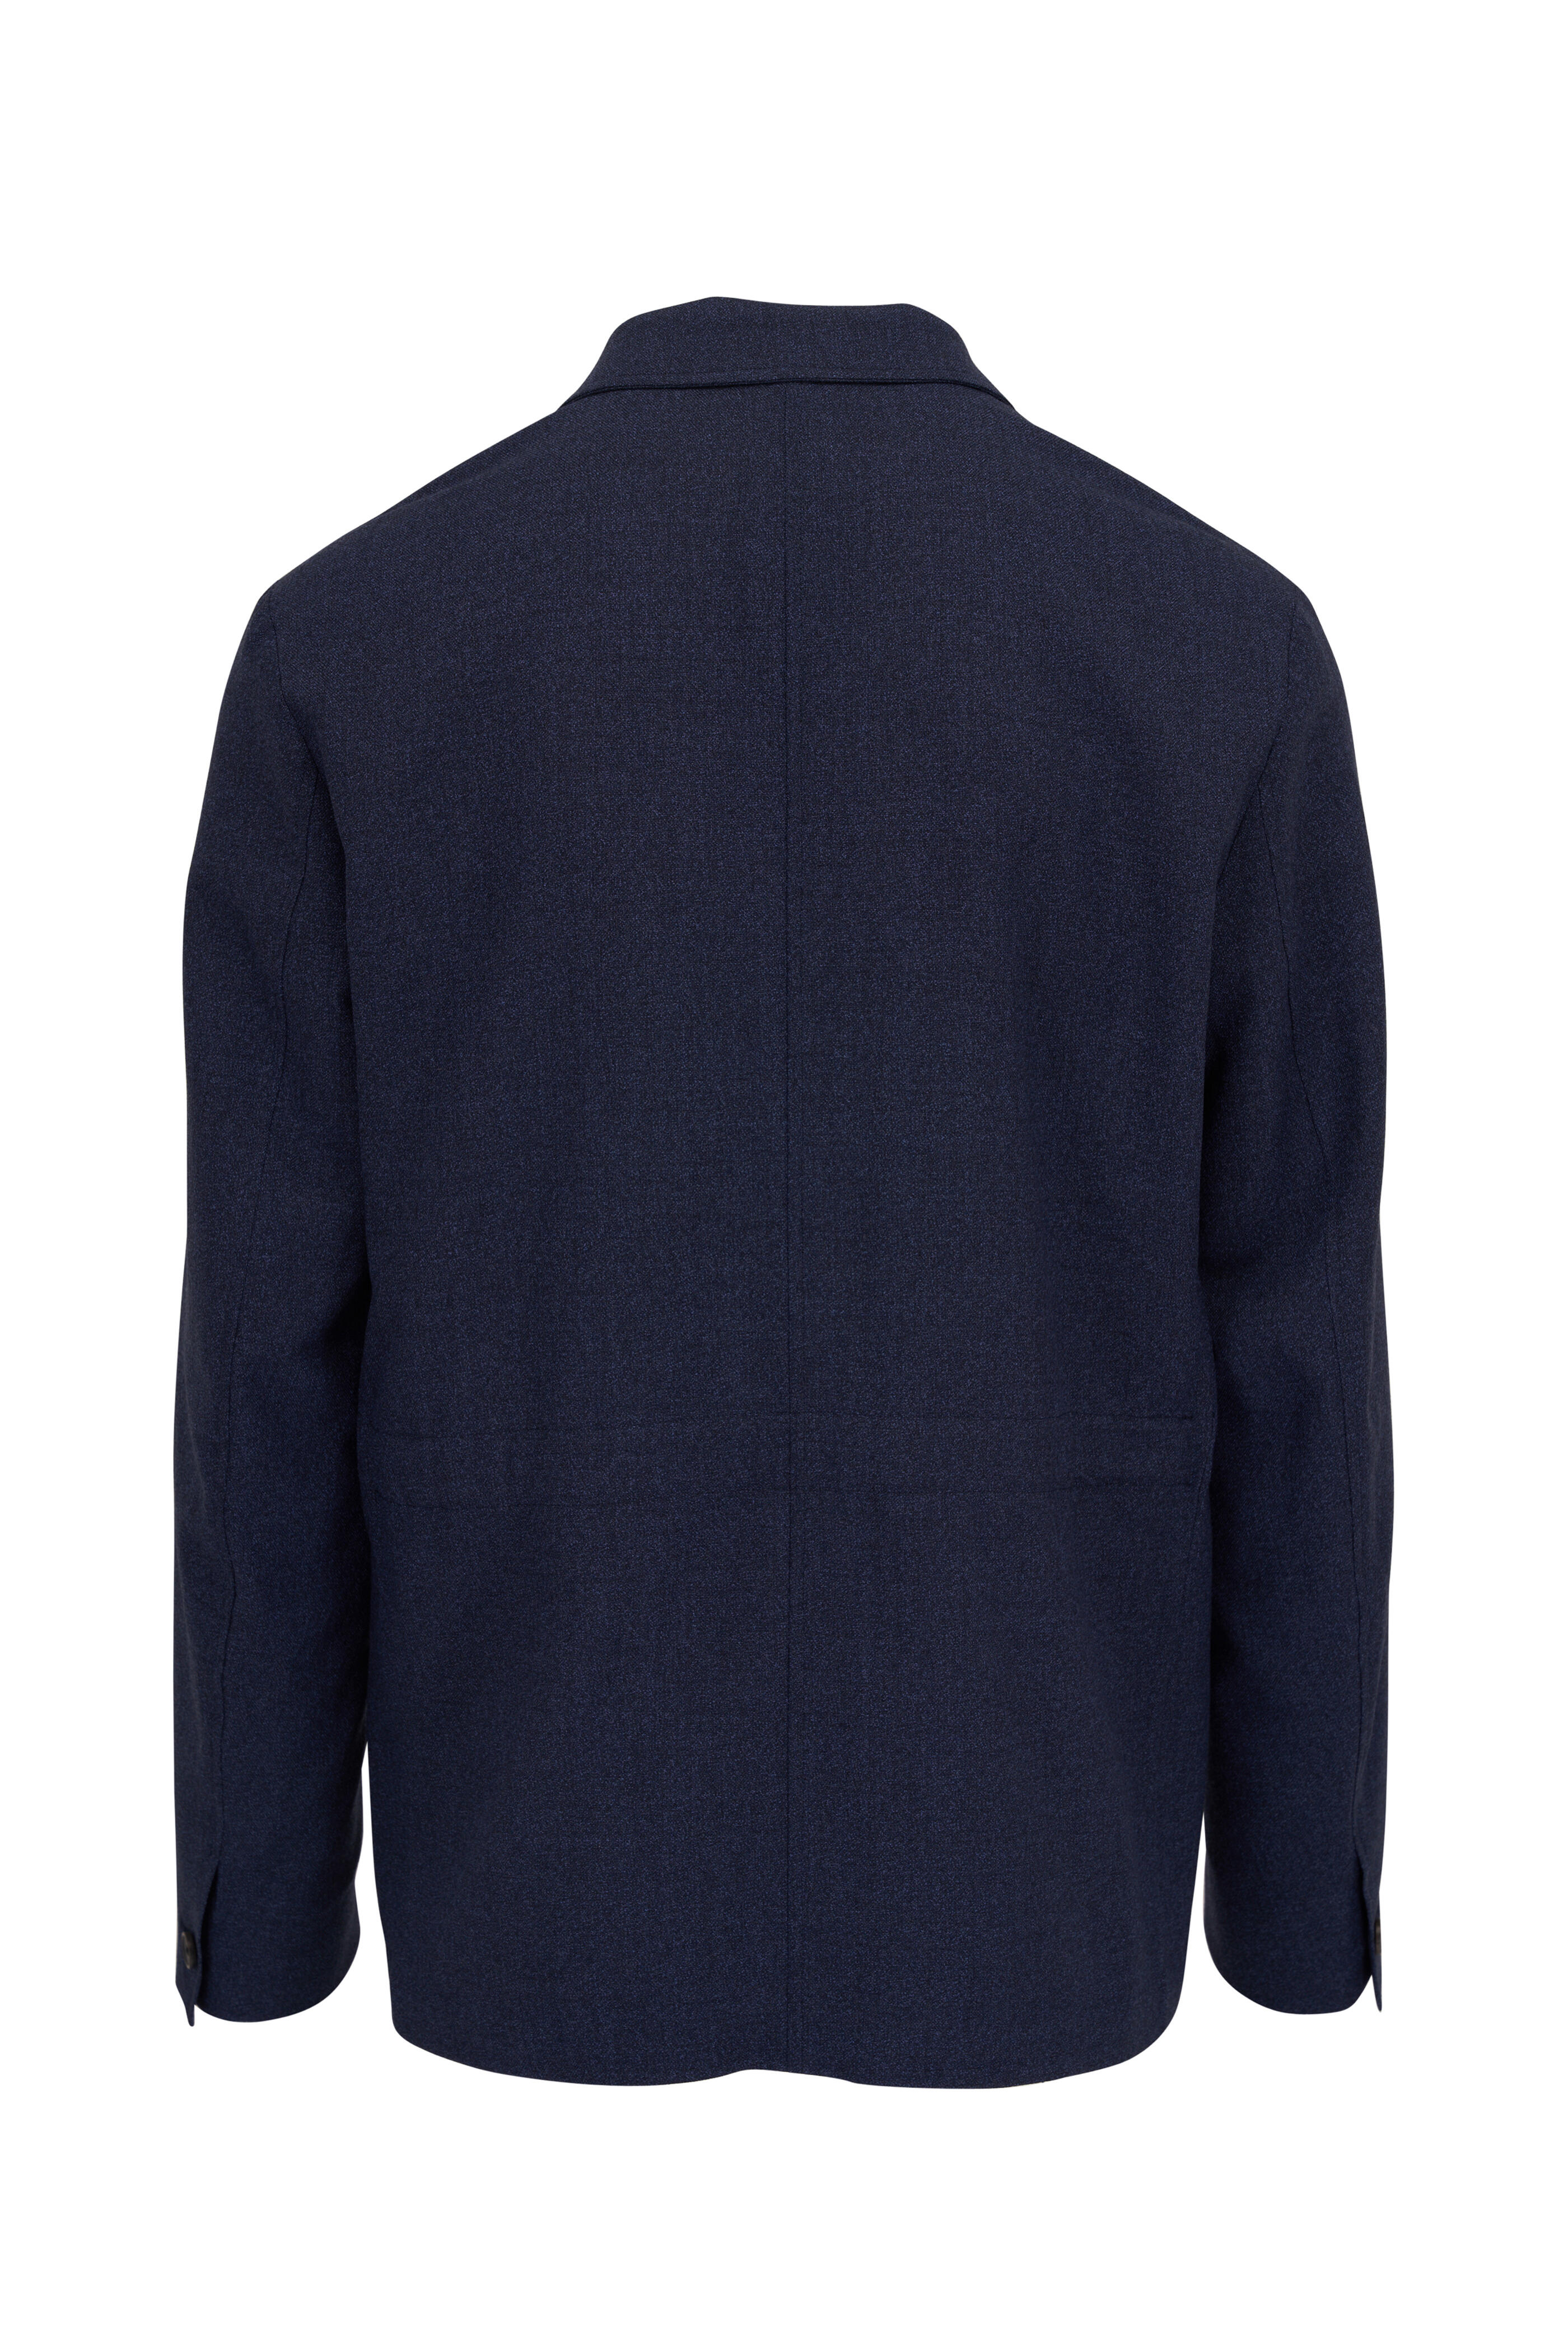 Paul Smith - Navy Button Wool Casual Jacket | Mitchell Stores